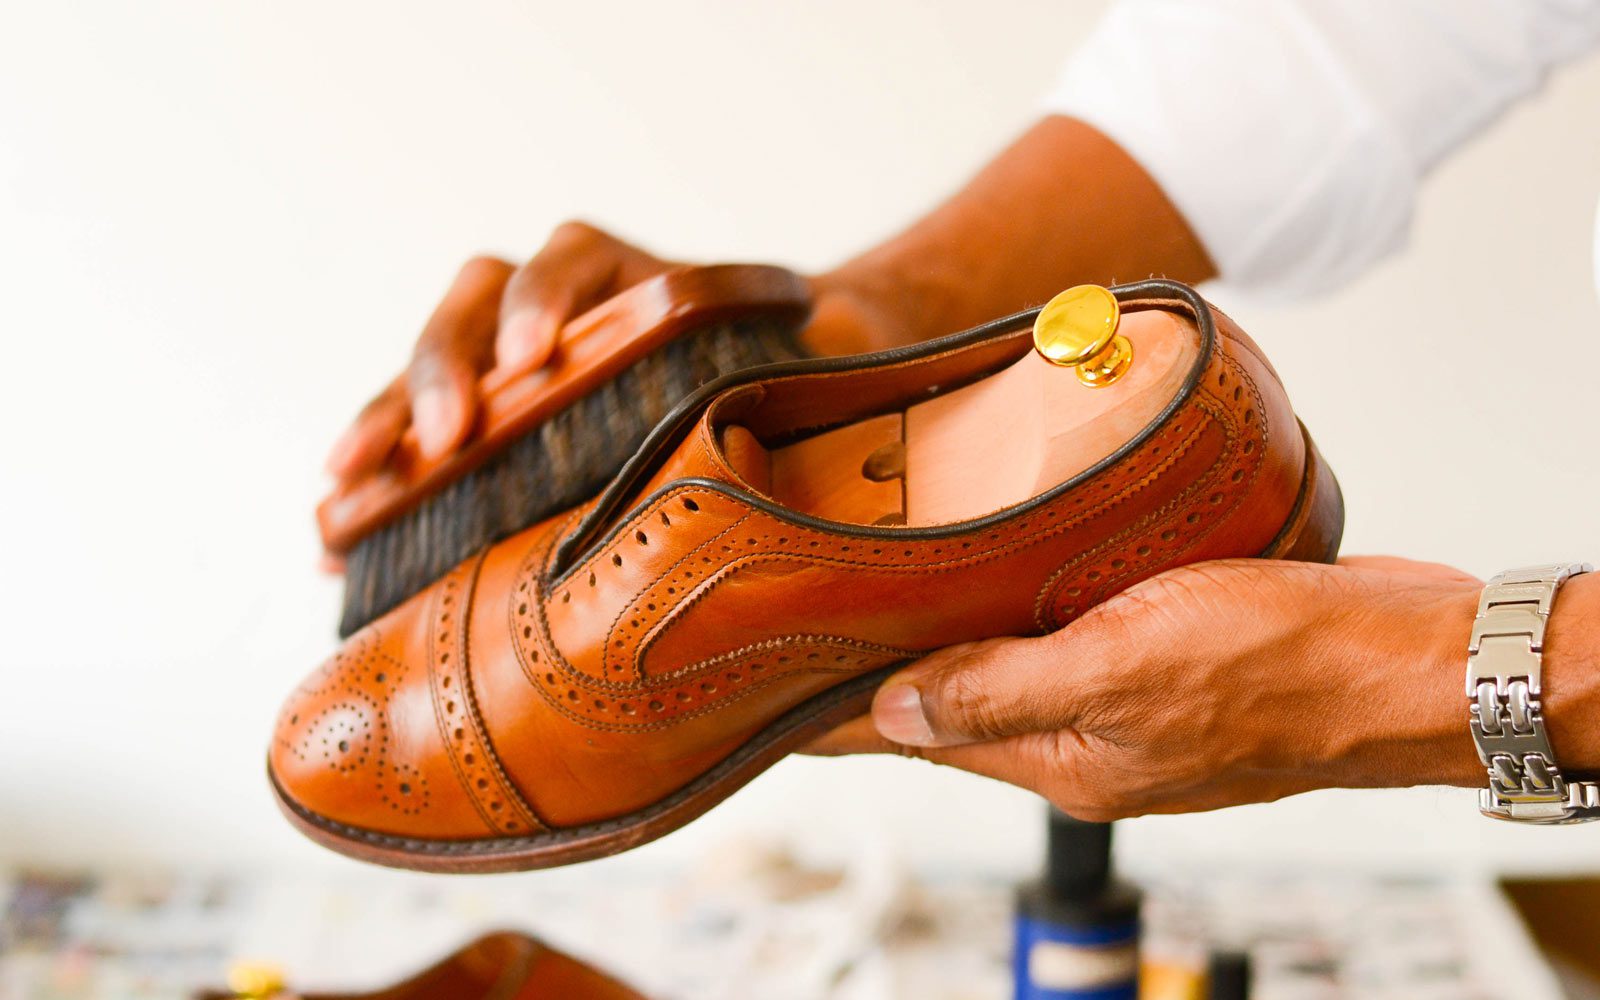 mens leather shoe care